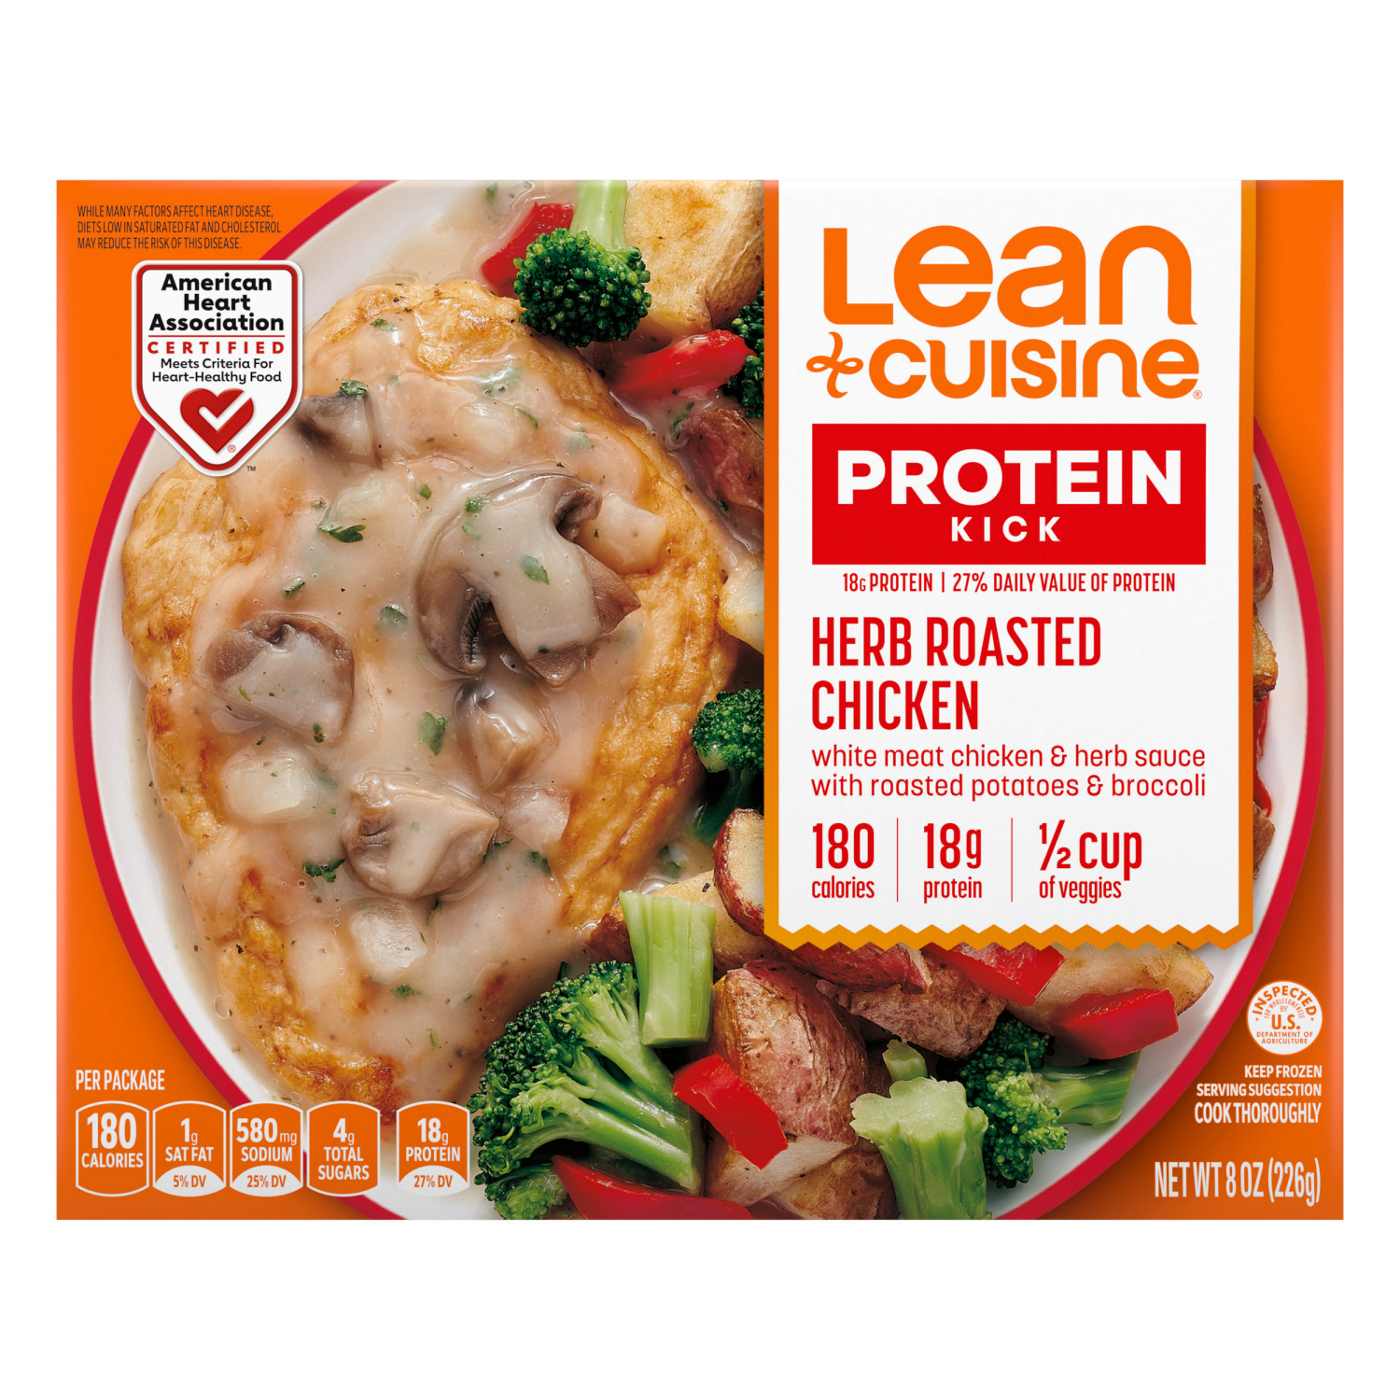 Lean Cuisine 18g Protein Herb Roasted Chicken Frozen Meal; image 1 of 7